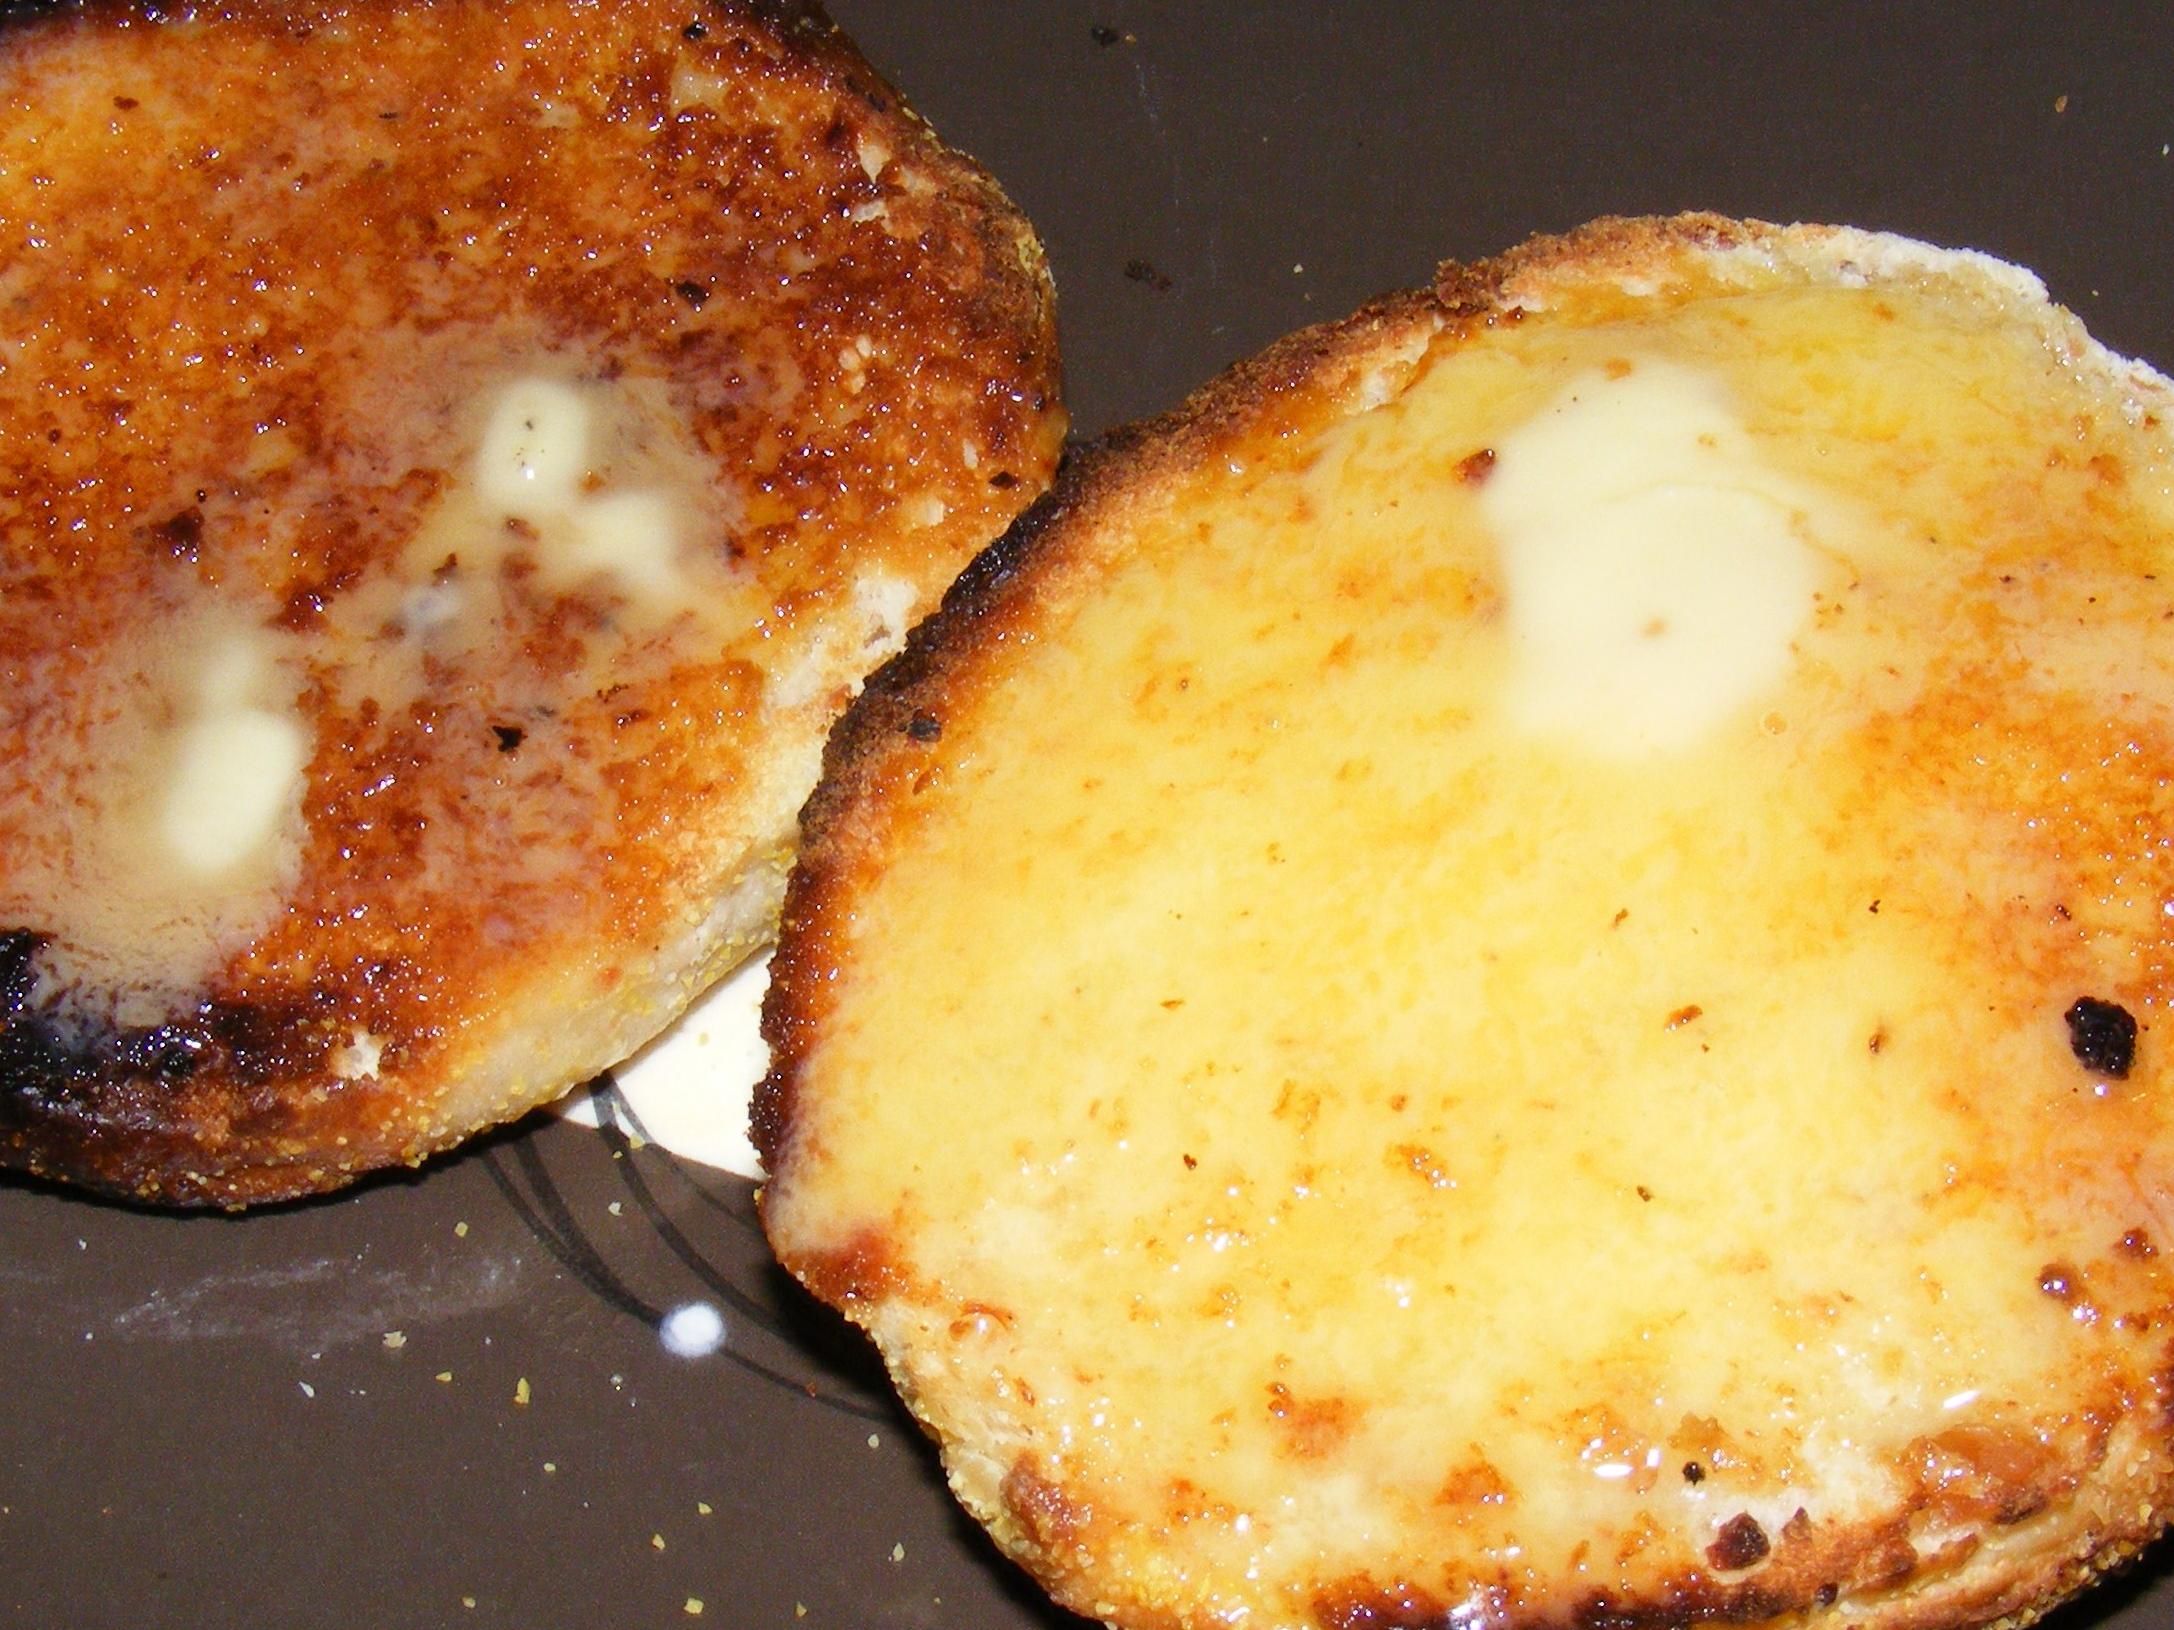  The combination of crispy bacon, melted cheese, and fluffy english muffins is unbeatable.